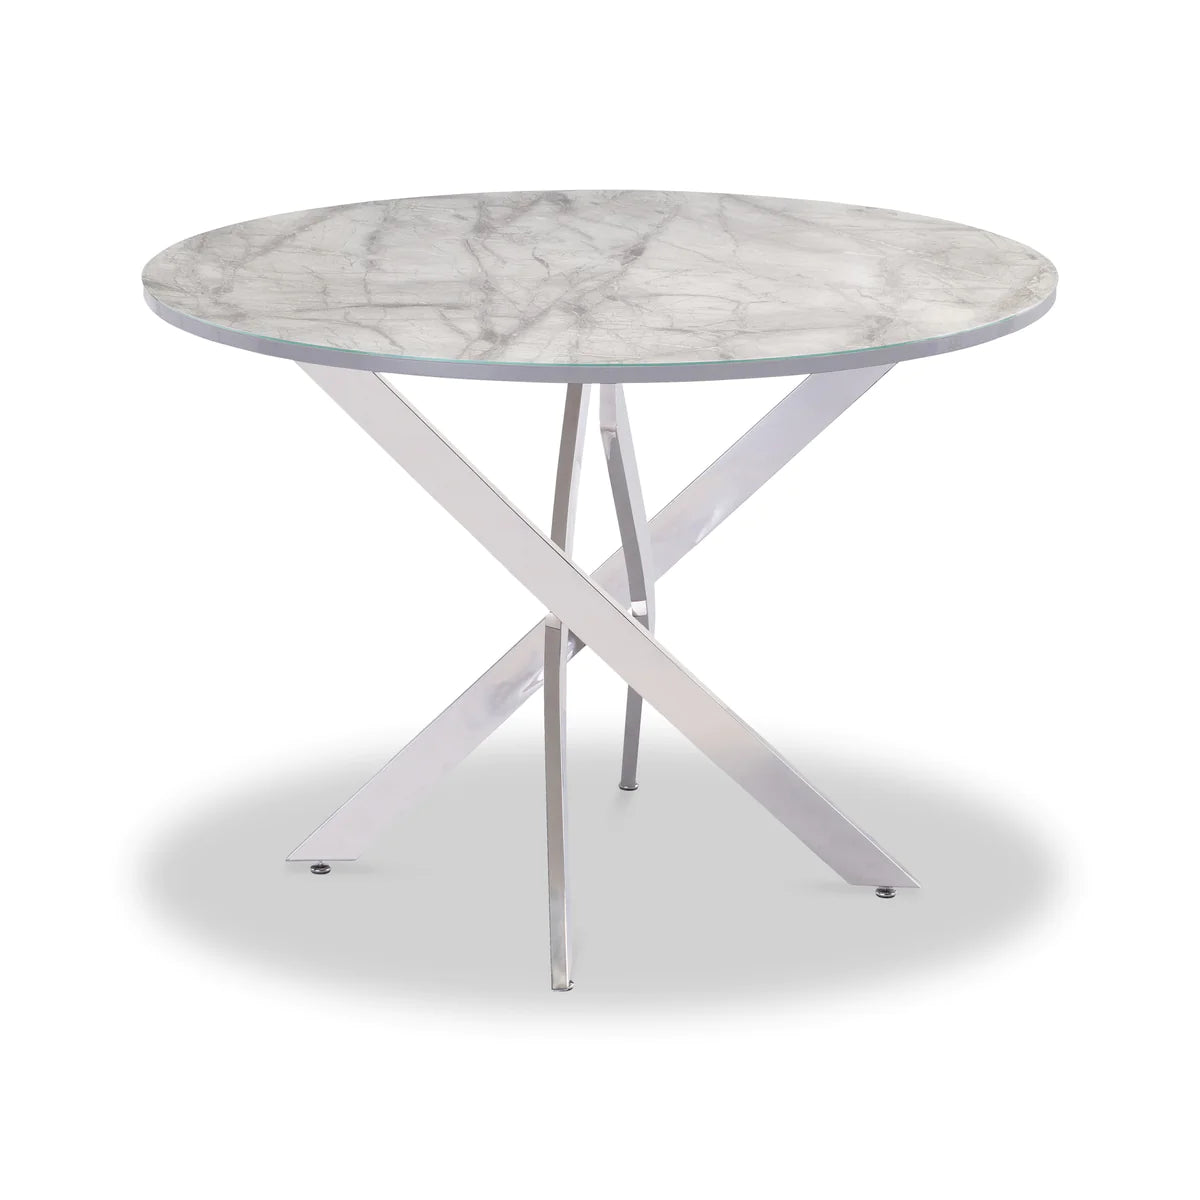 Carlow Round Dining Table - Grey